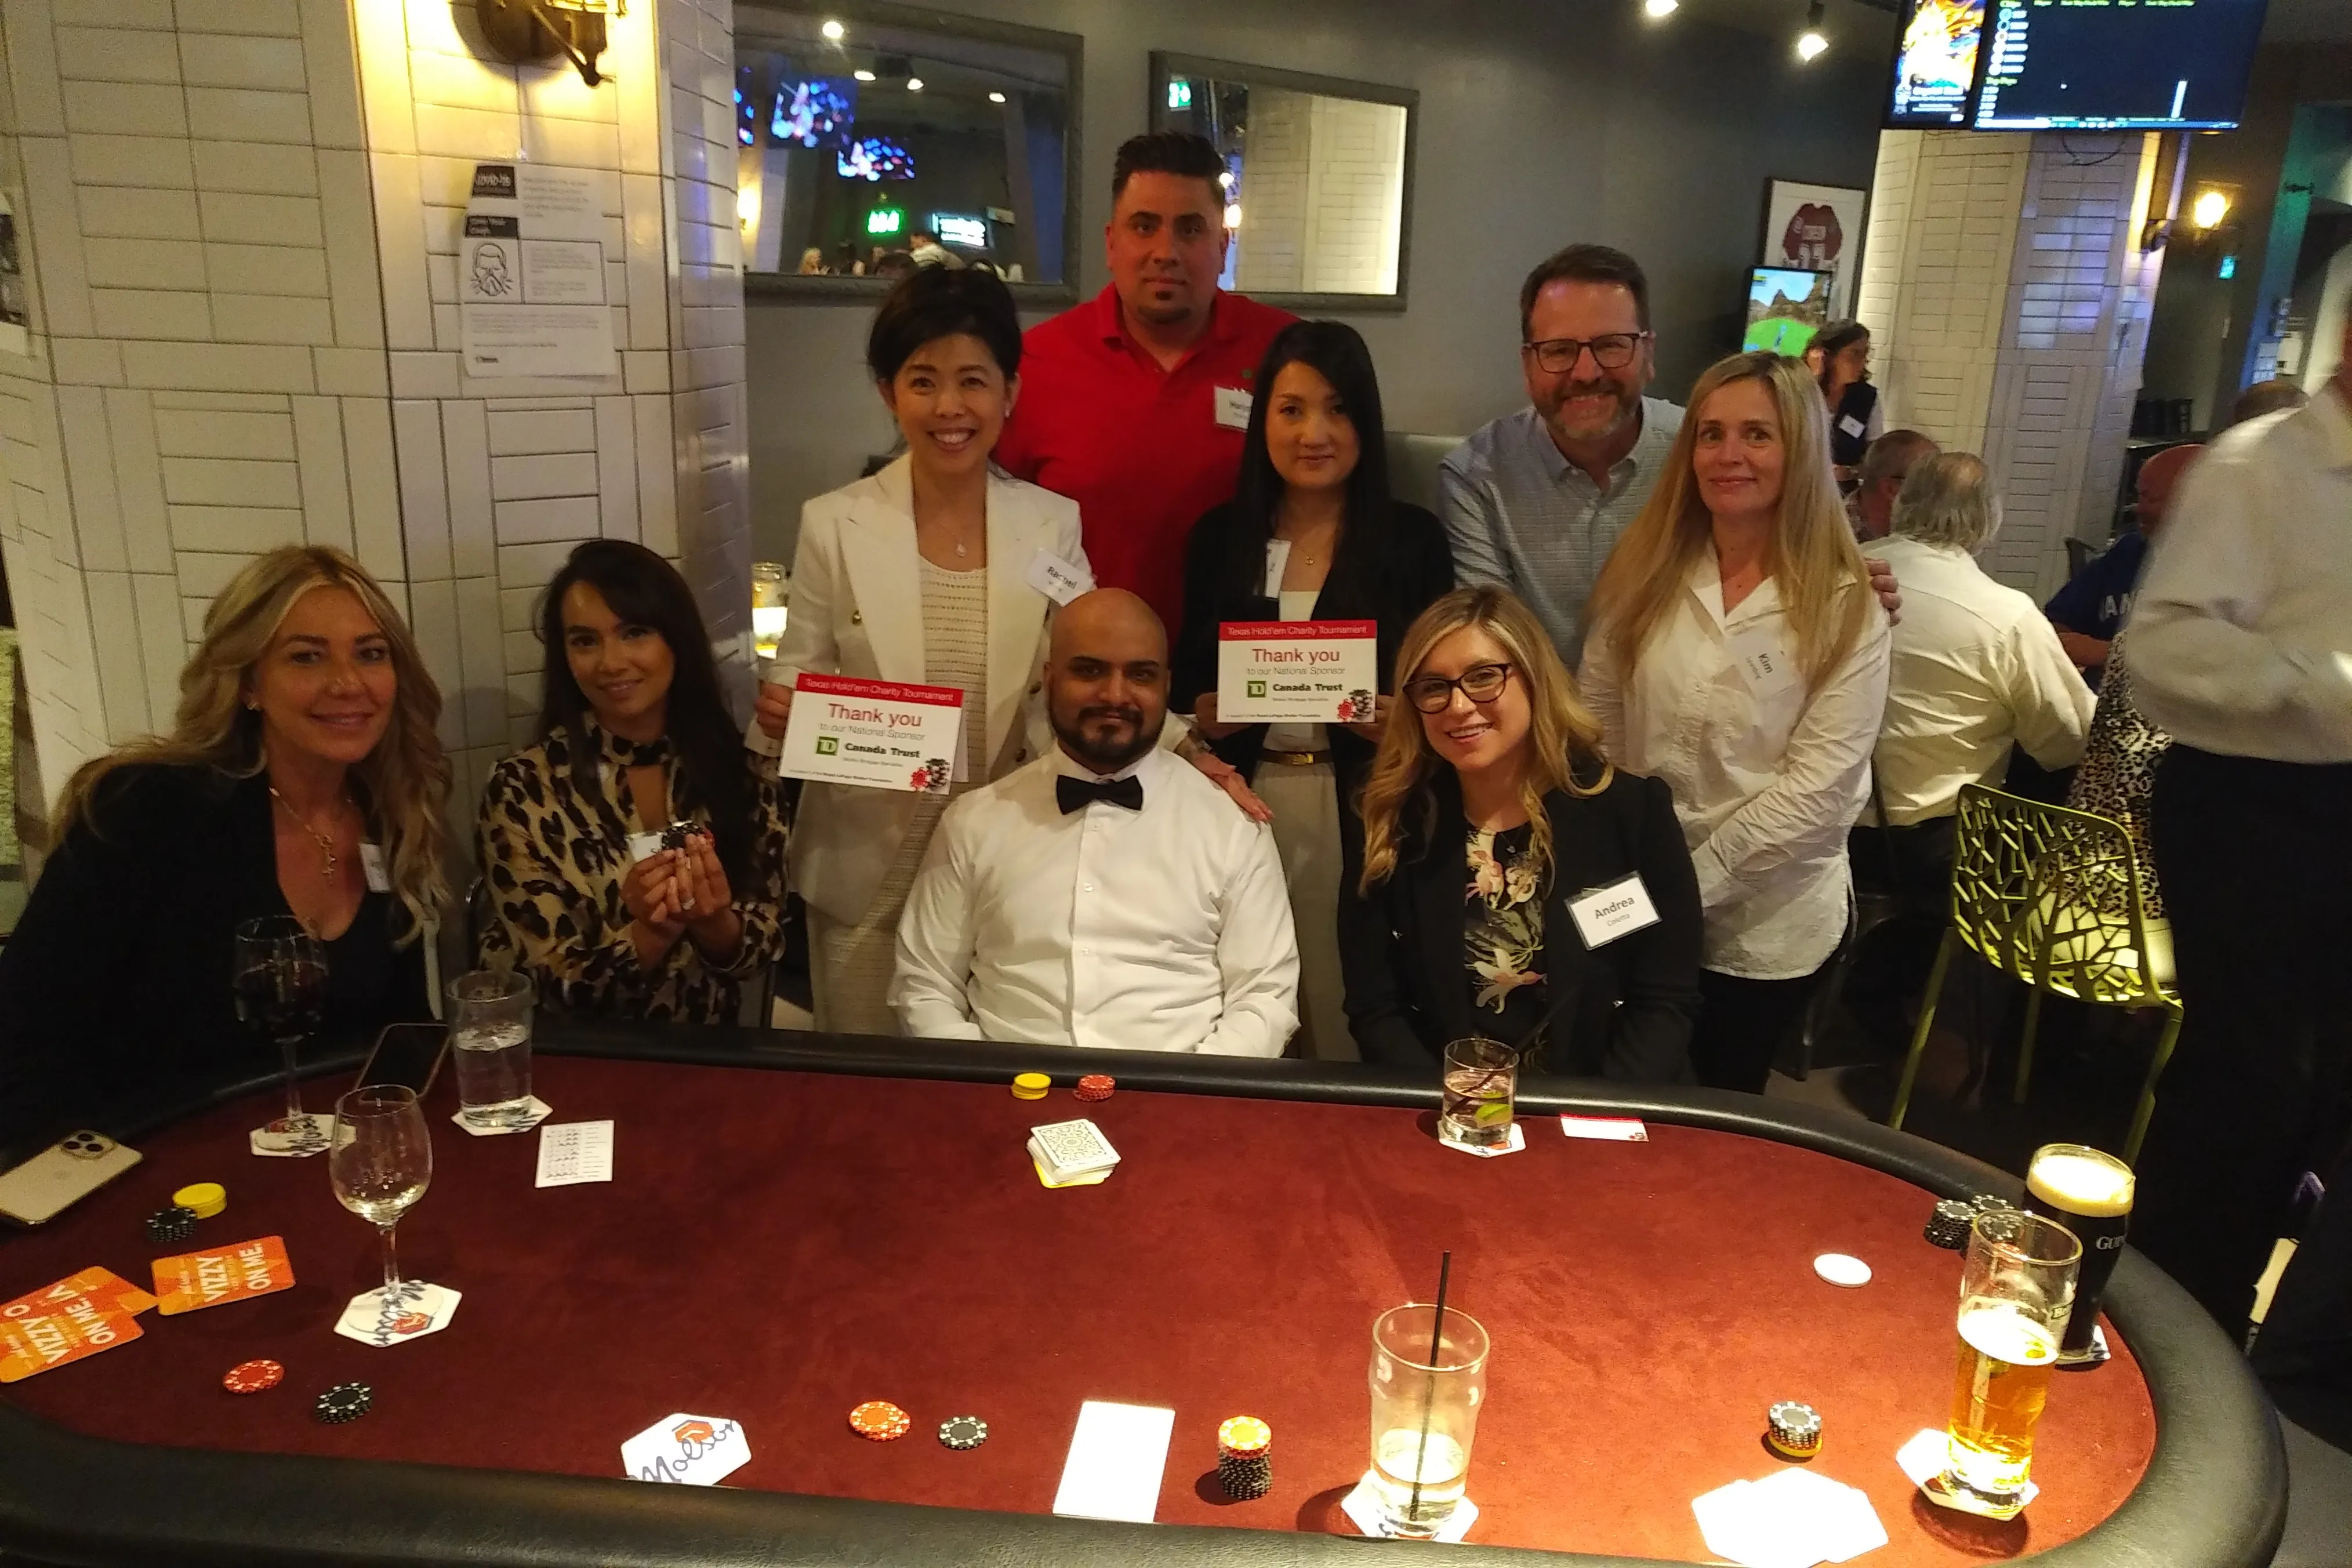 $29000 raised for the Royal LePage Shelter Foundation at Charity Poker Tournament – Royal LePage Leading Edge Blog